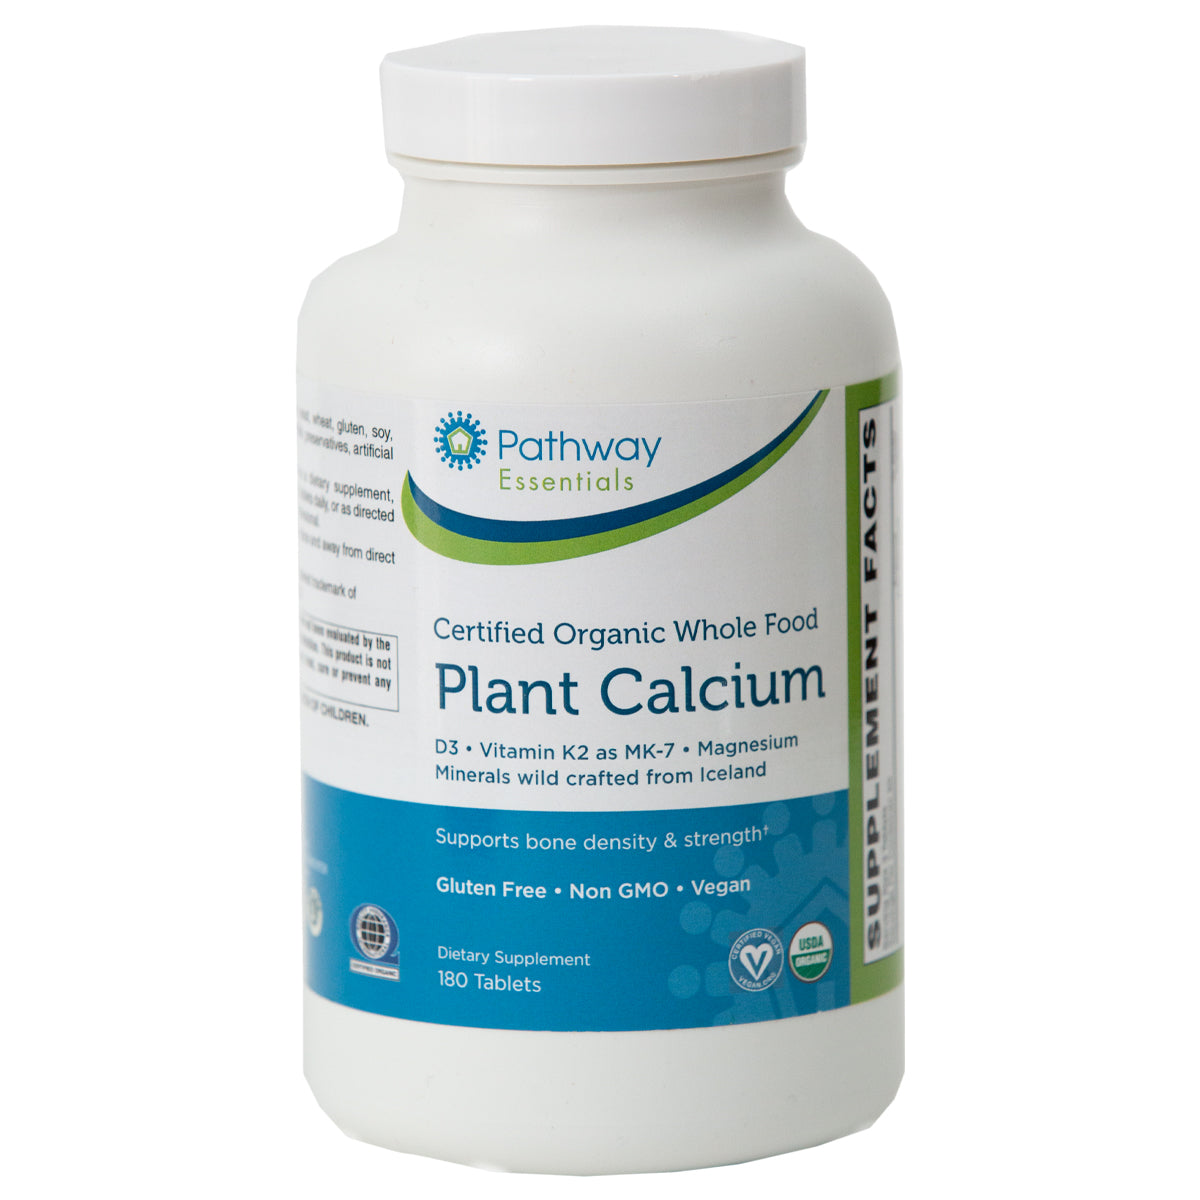 Certified Organic Whole Food Plant Calcium